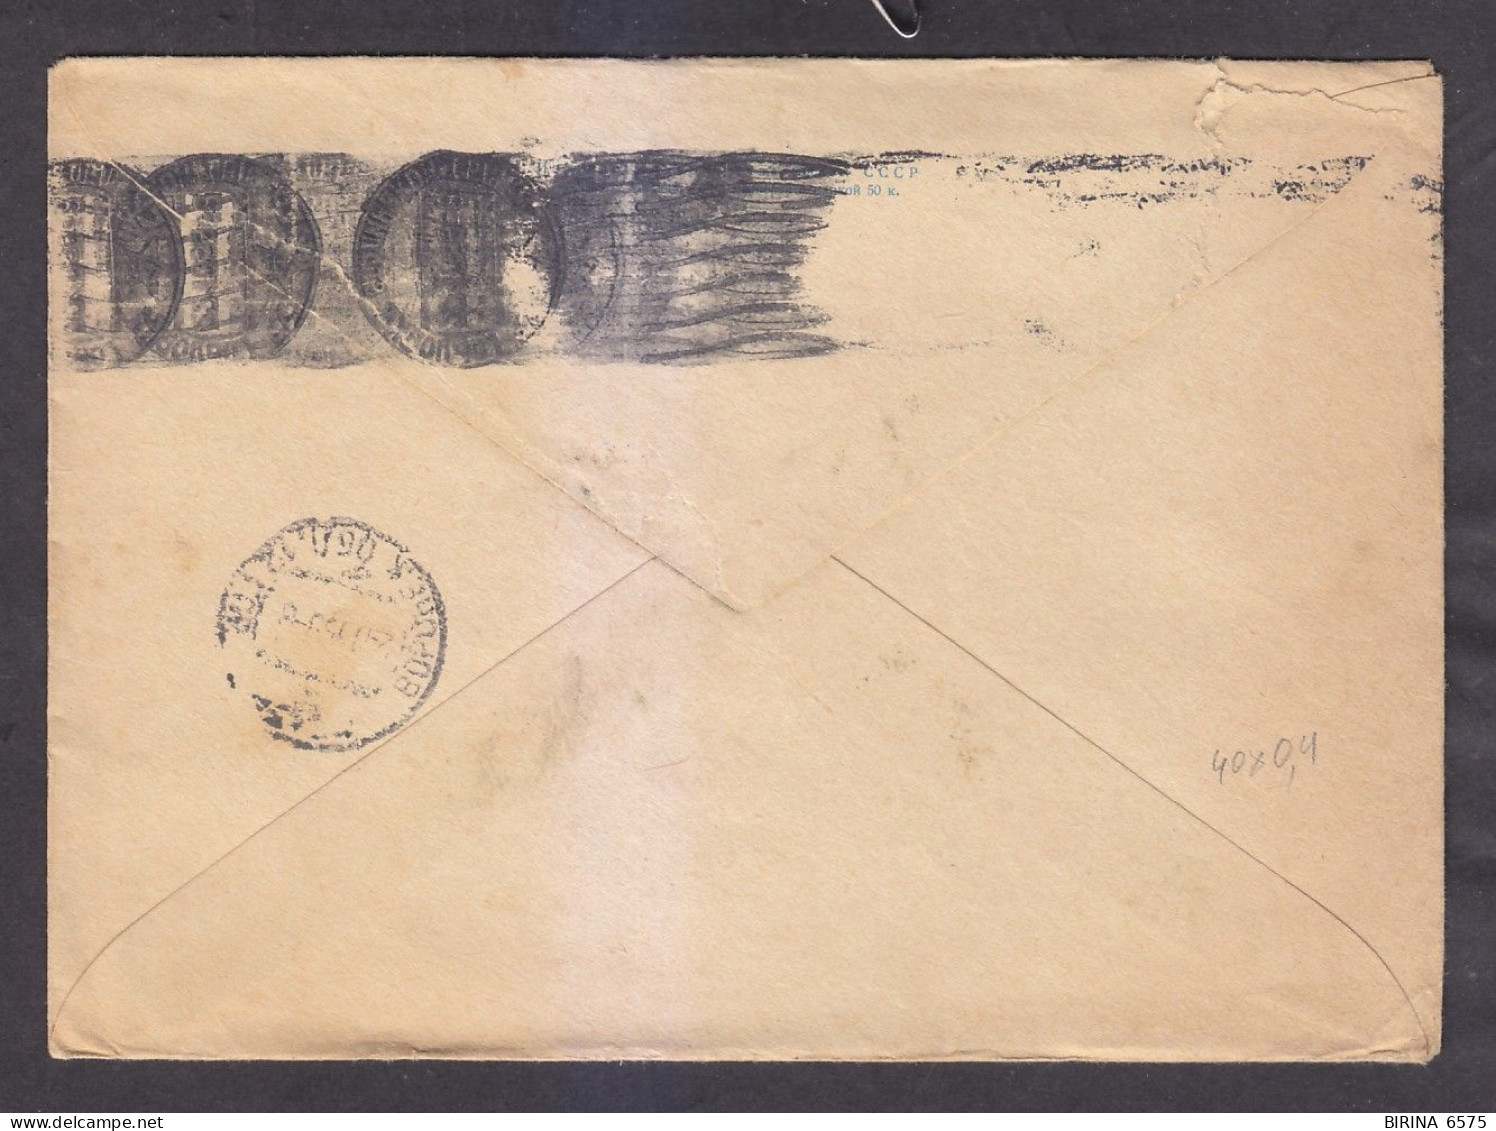 Envelope. The USSR. HAPPY SPRING DAY! Mail. 1959. - 8-46 - Lettres & Documents